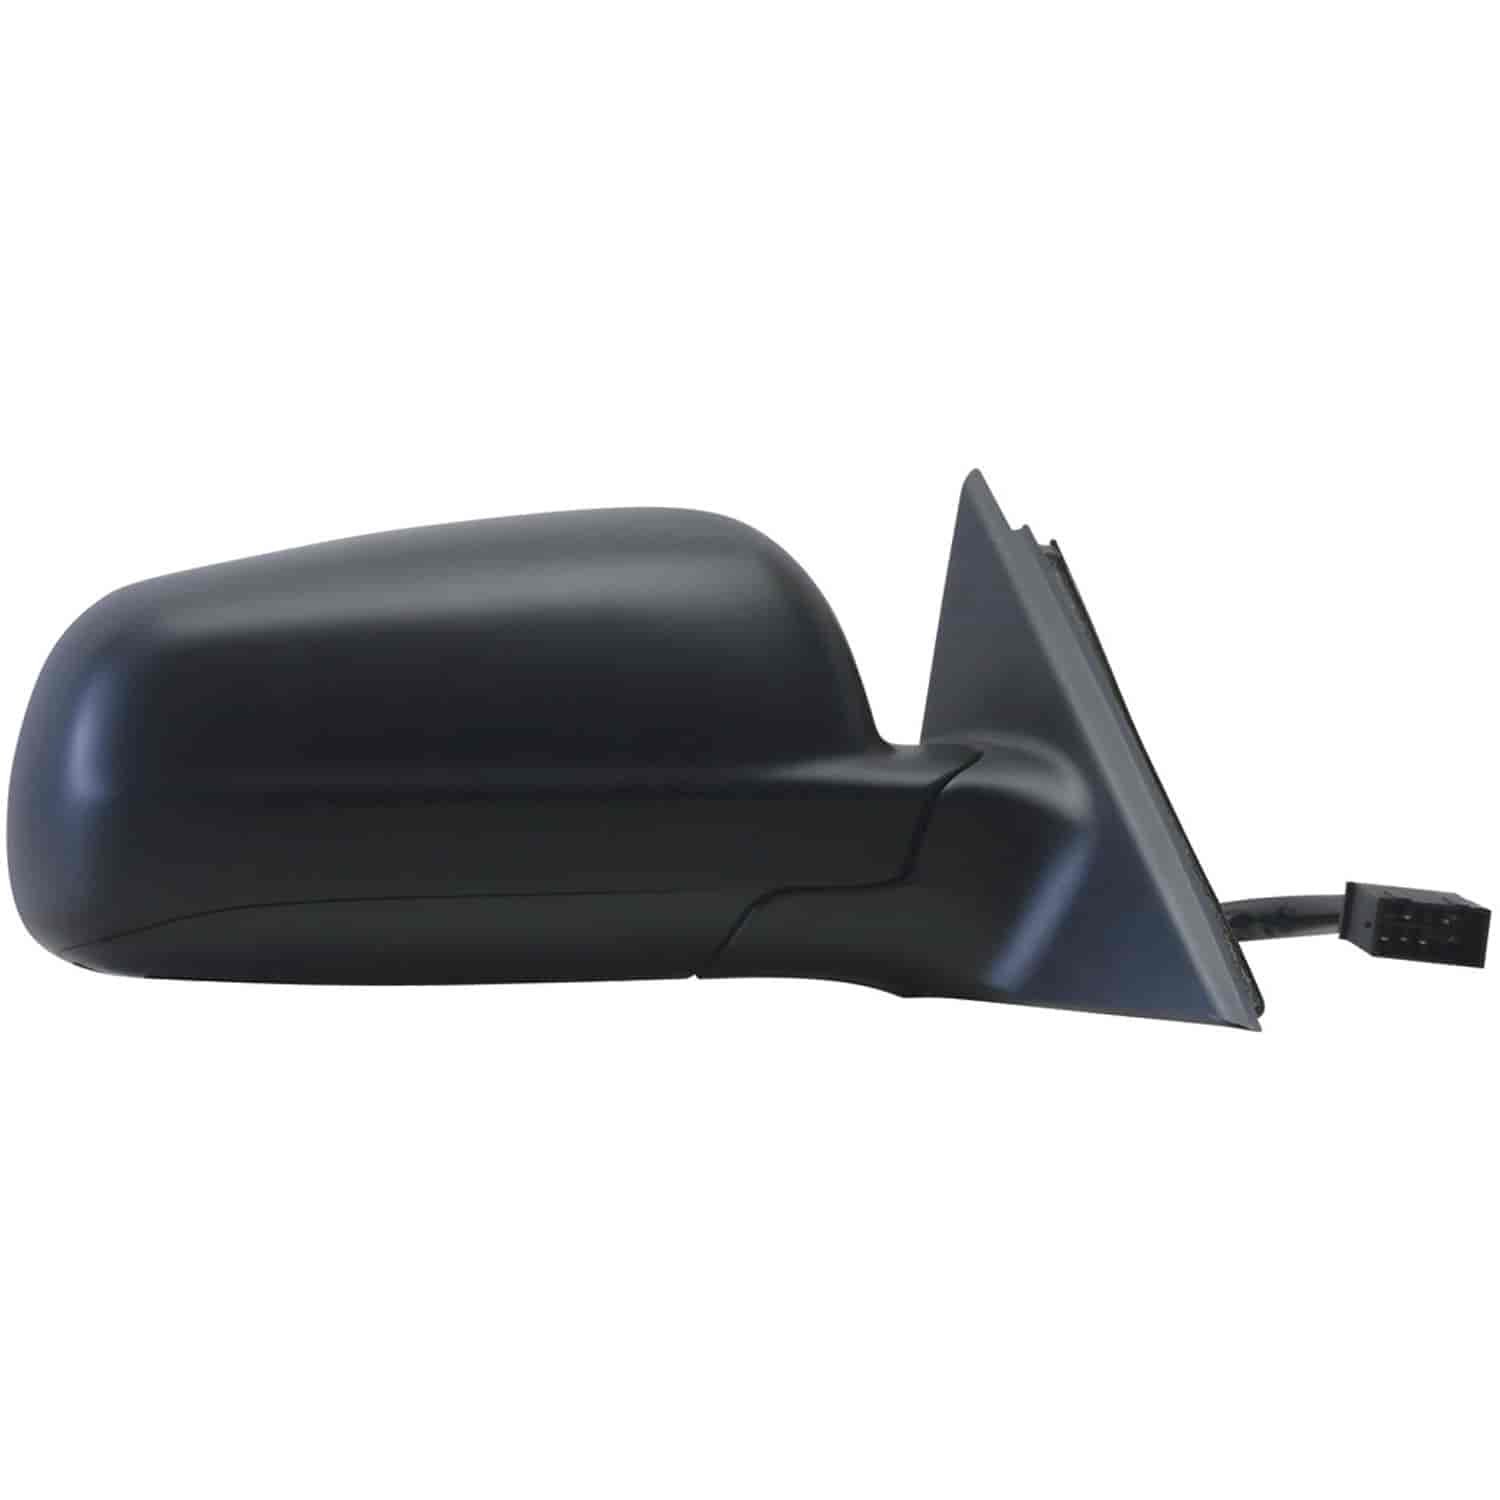 OEM Style Replacement mirror for 01-04 VW Passat w/o memory passenger side mirror tested to fit and